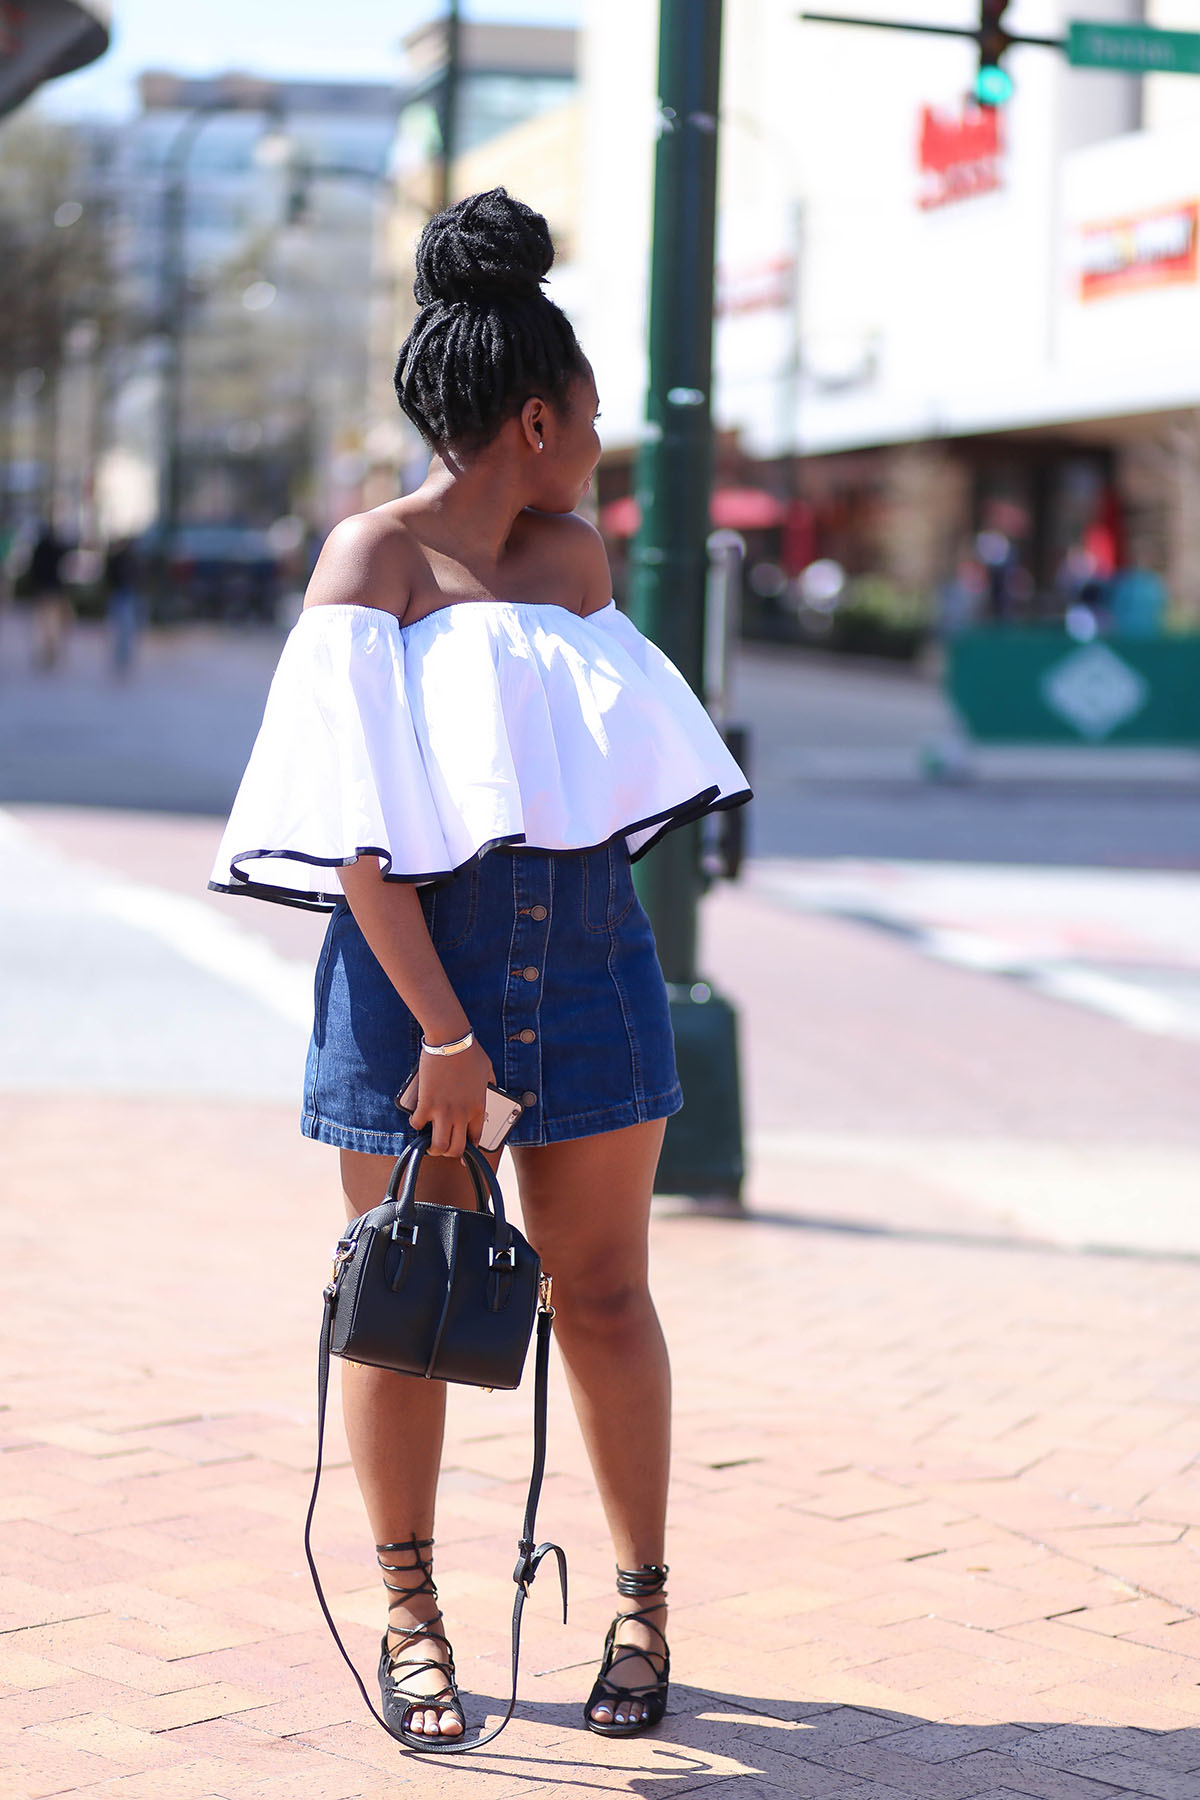 Fashion Bombshell of the Day: Fatou from Maryland – Fashion Bomb Daily ...